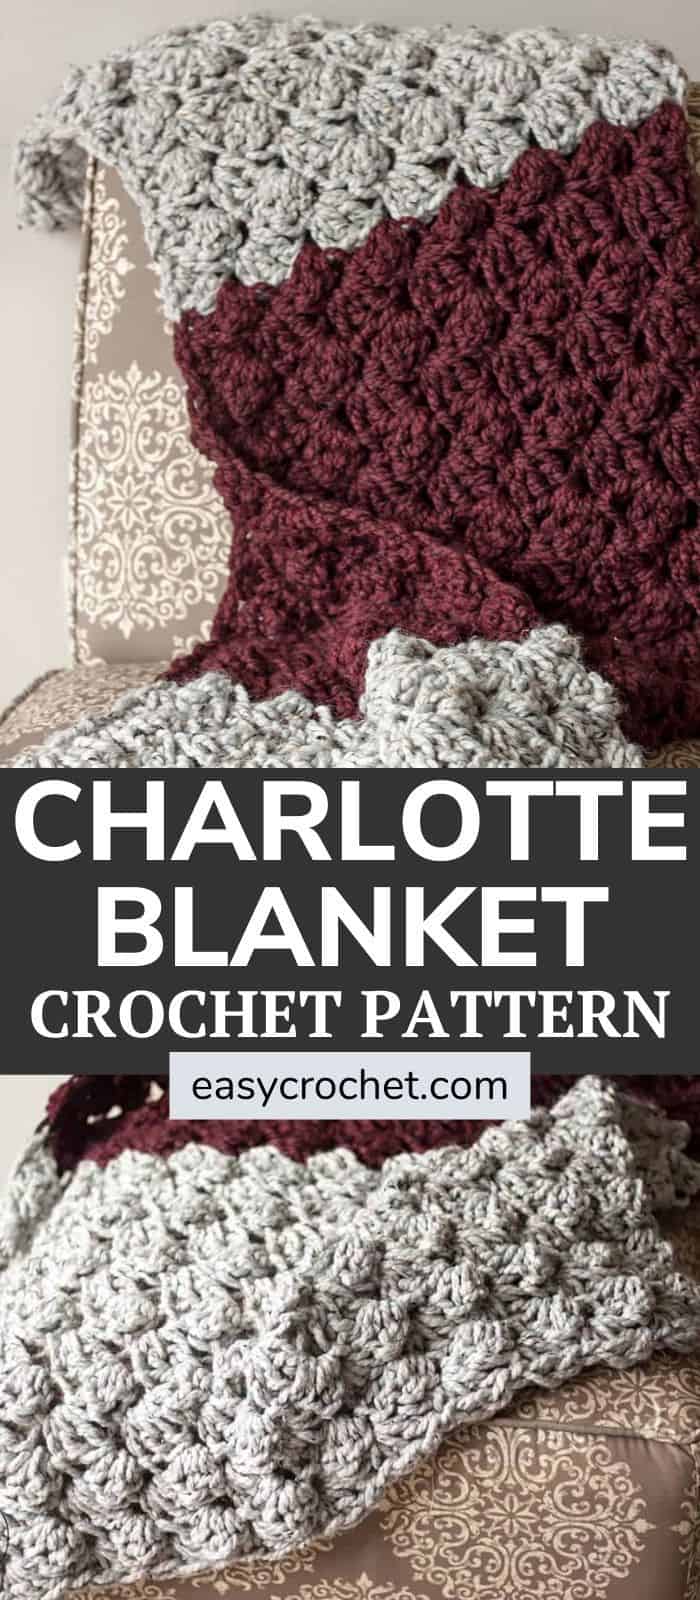 Free Crochet Blanket Pattern - The Charlotte - Beginner-Friendly and works up fast! Find the free crochet pattern at easycrochet.com via @easycrochetcom